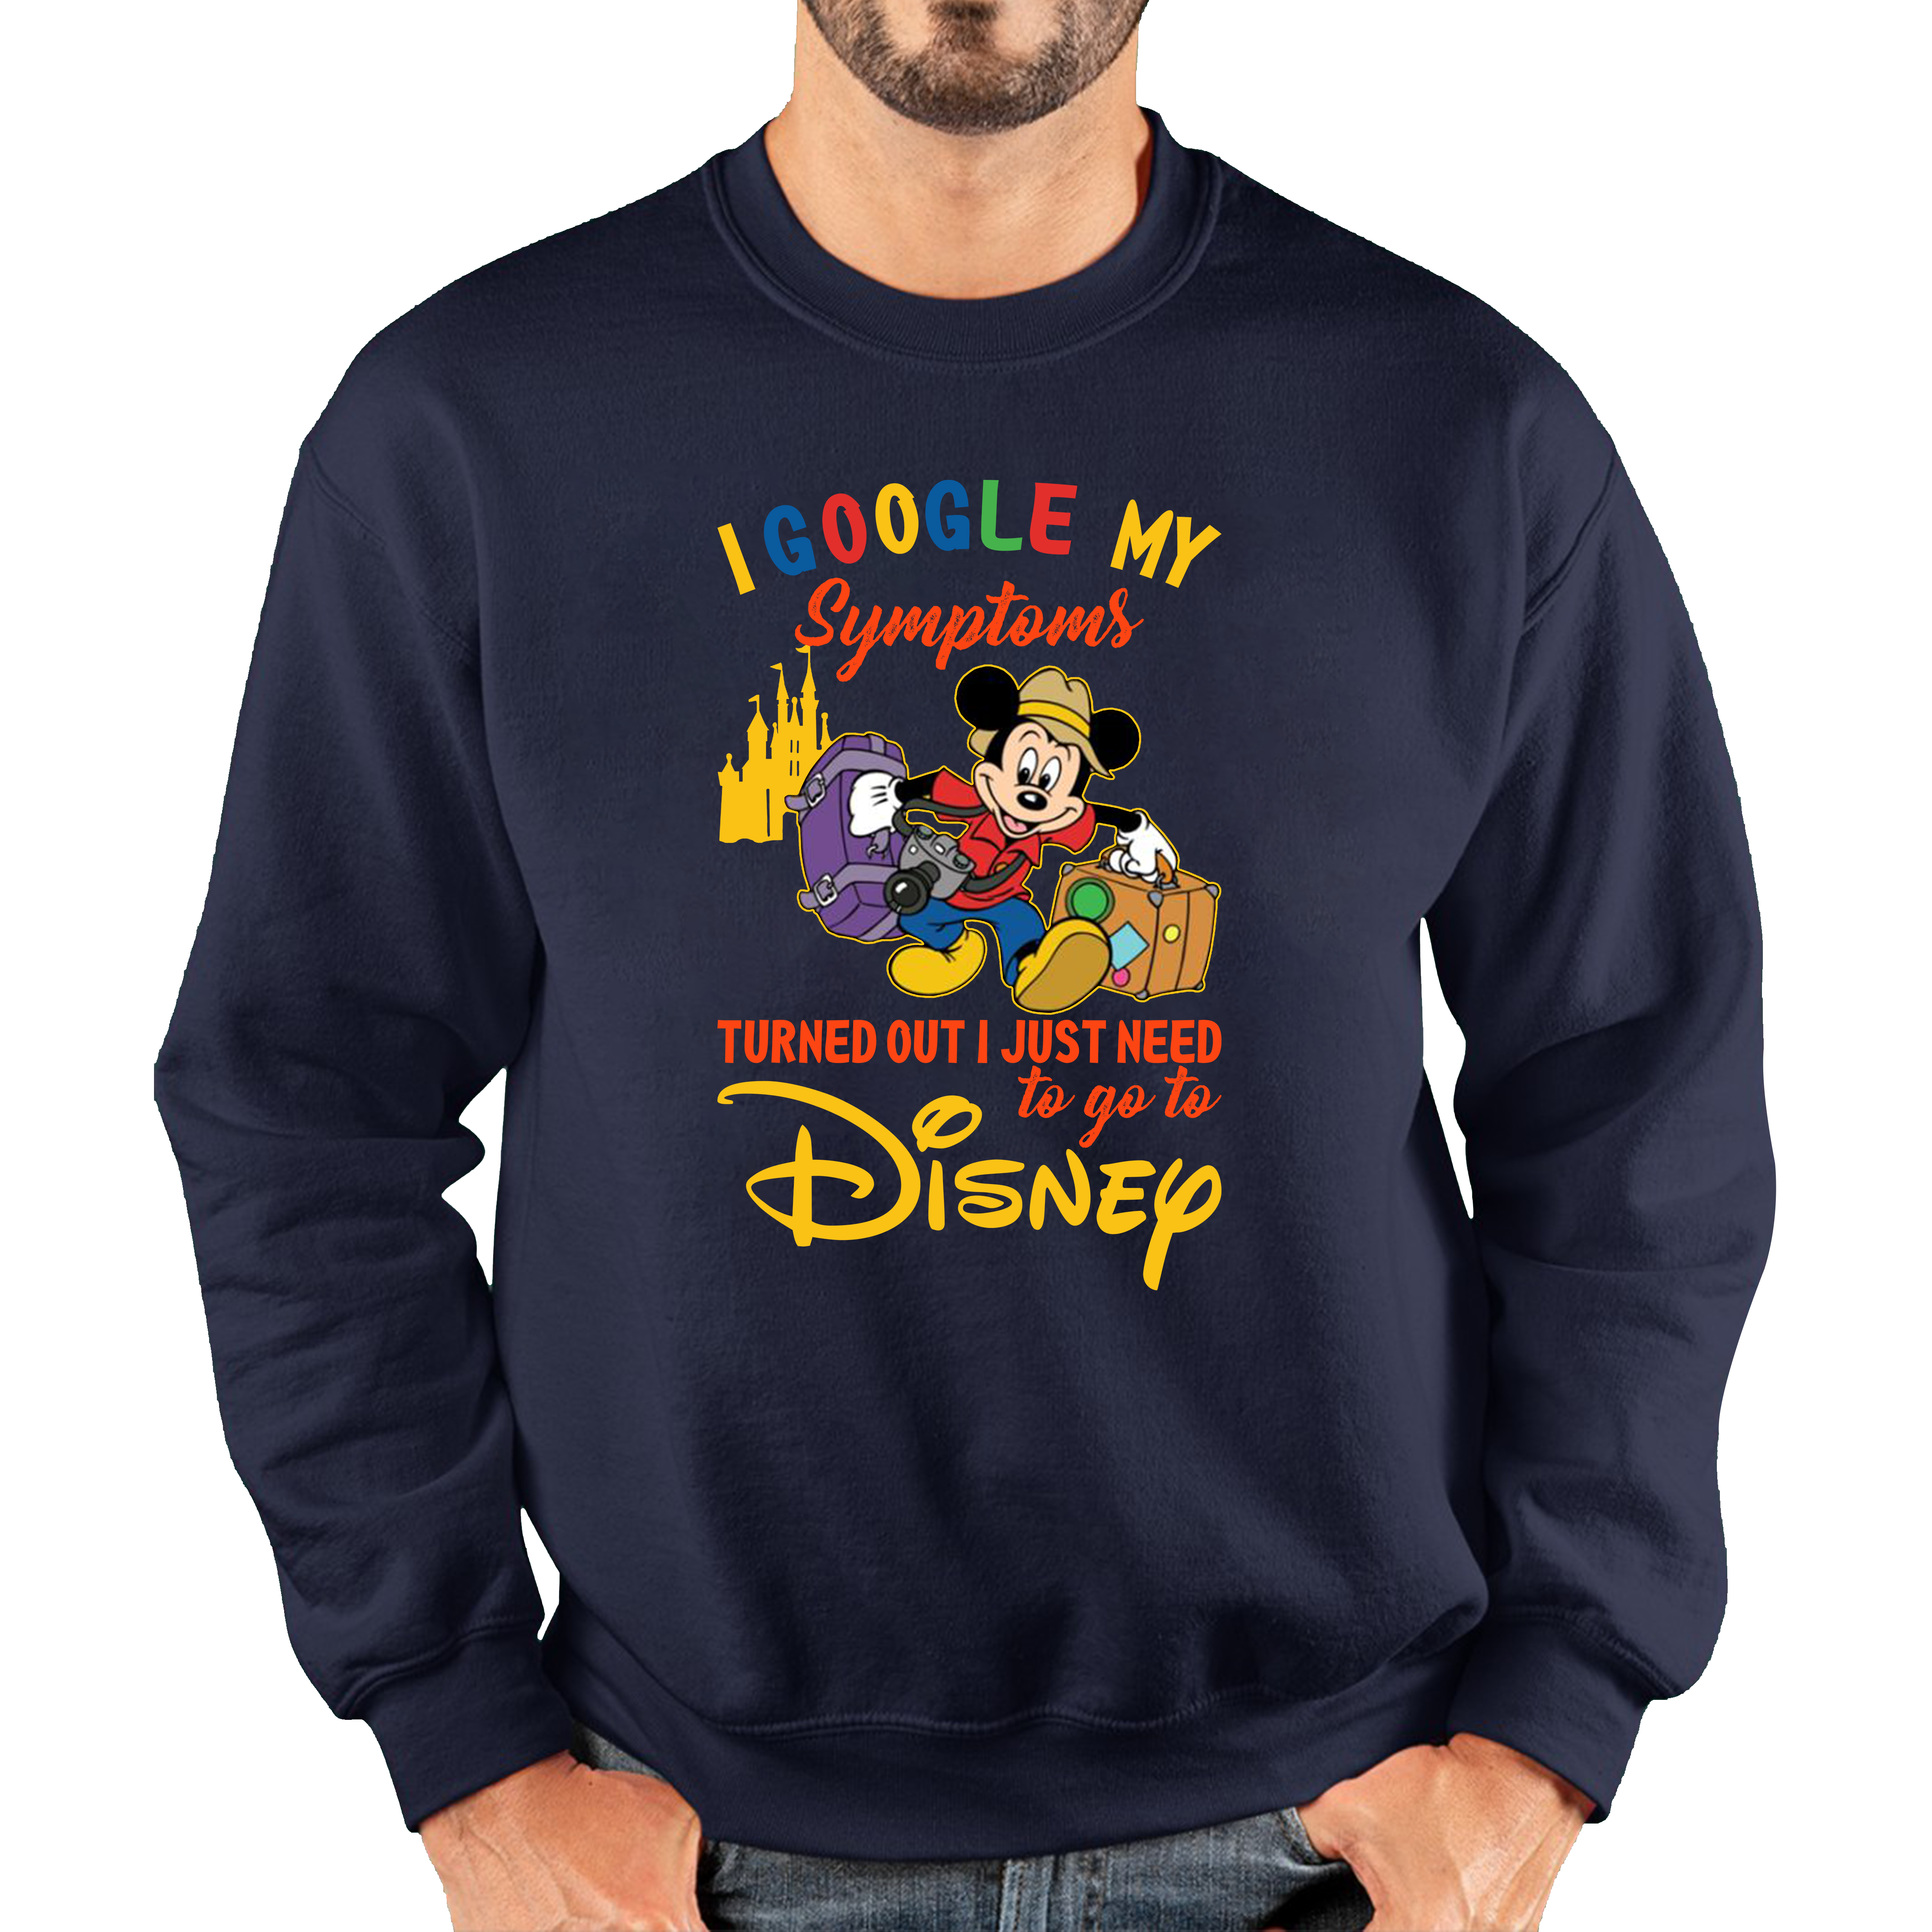 I Google My Symptoms Turned Out I Just Need To Go To Disney Adult Sweatshirt